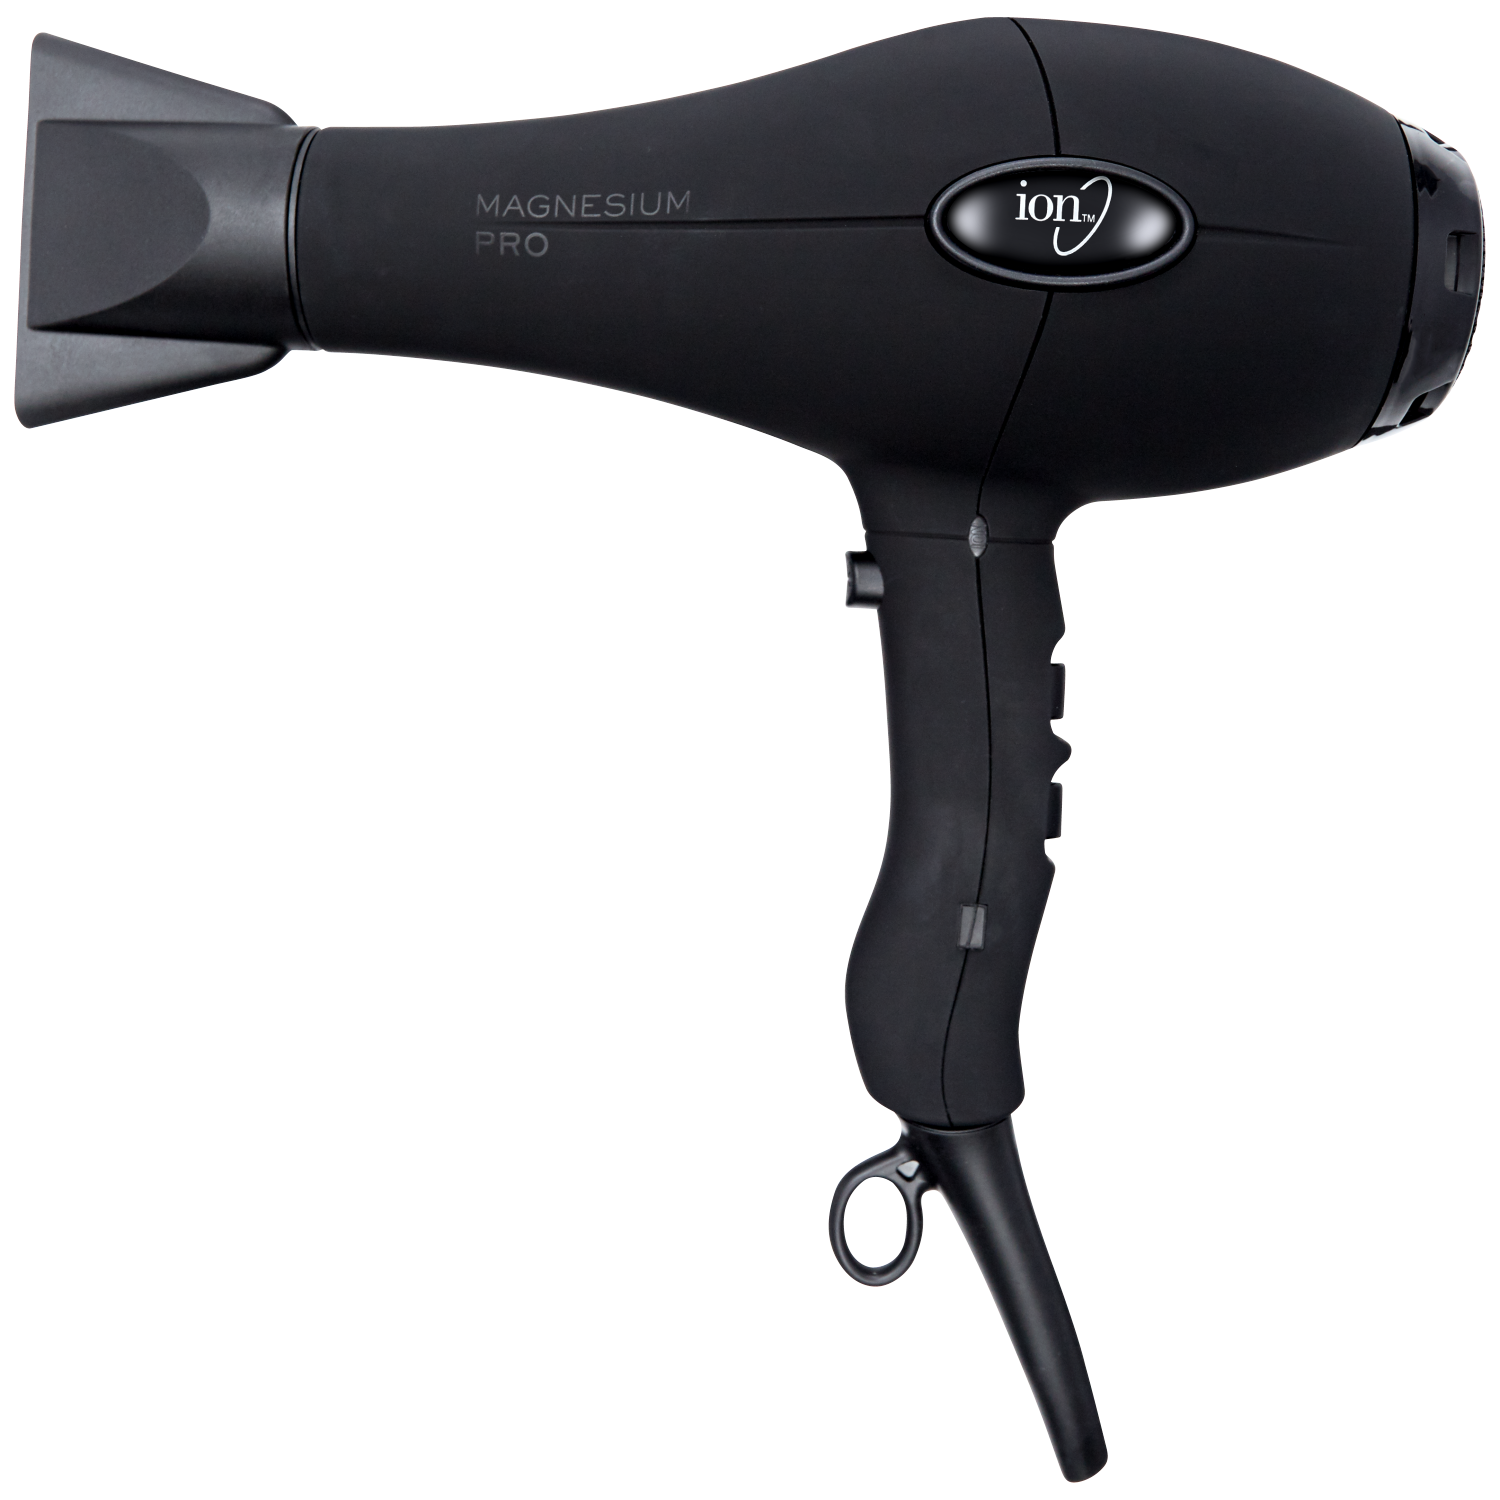 Hairdryer PNG Image with Transparent Background